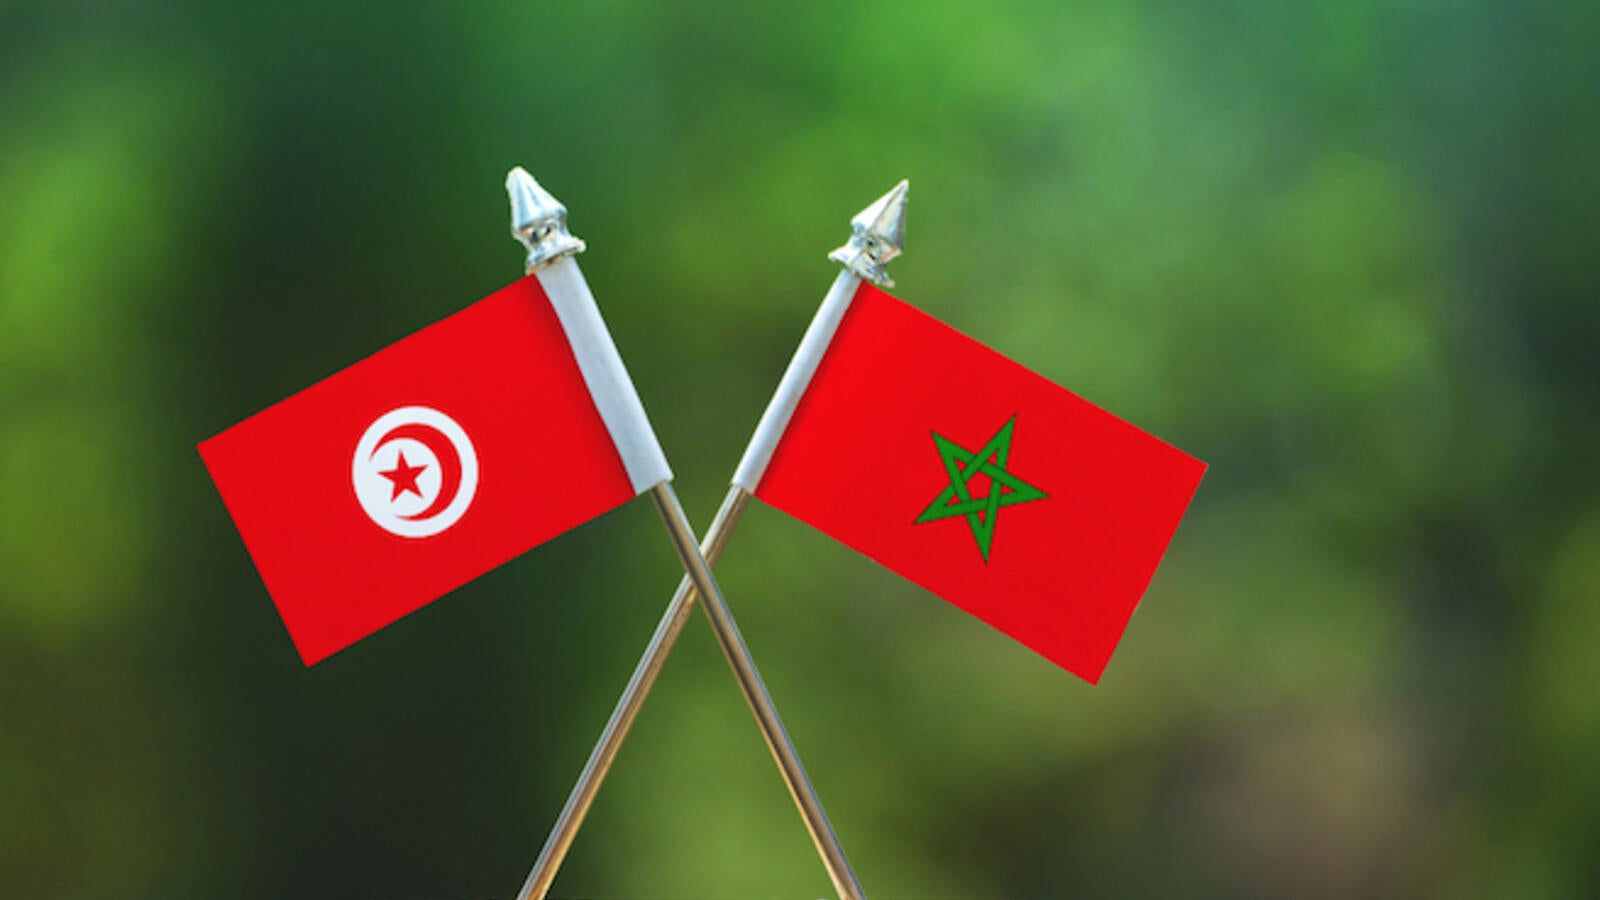 Tunisian and Moroccan flags, Shutterstock.